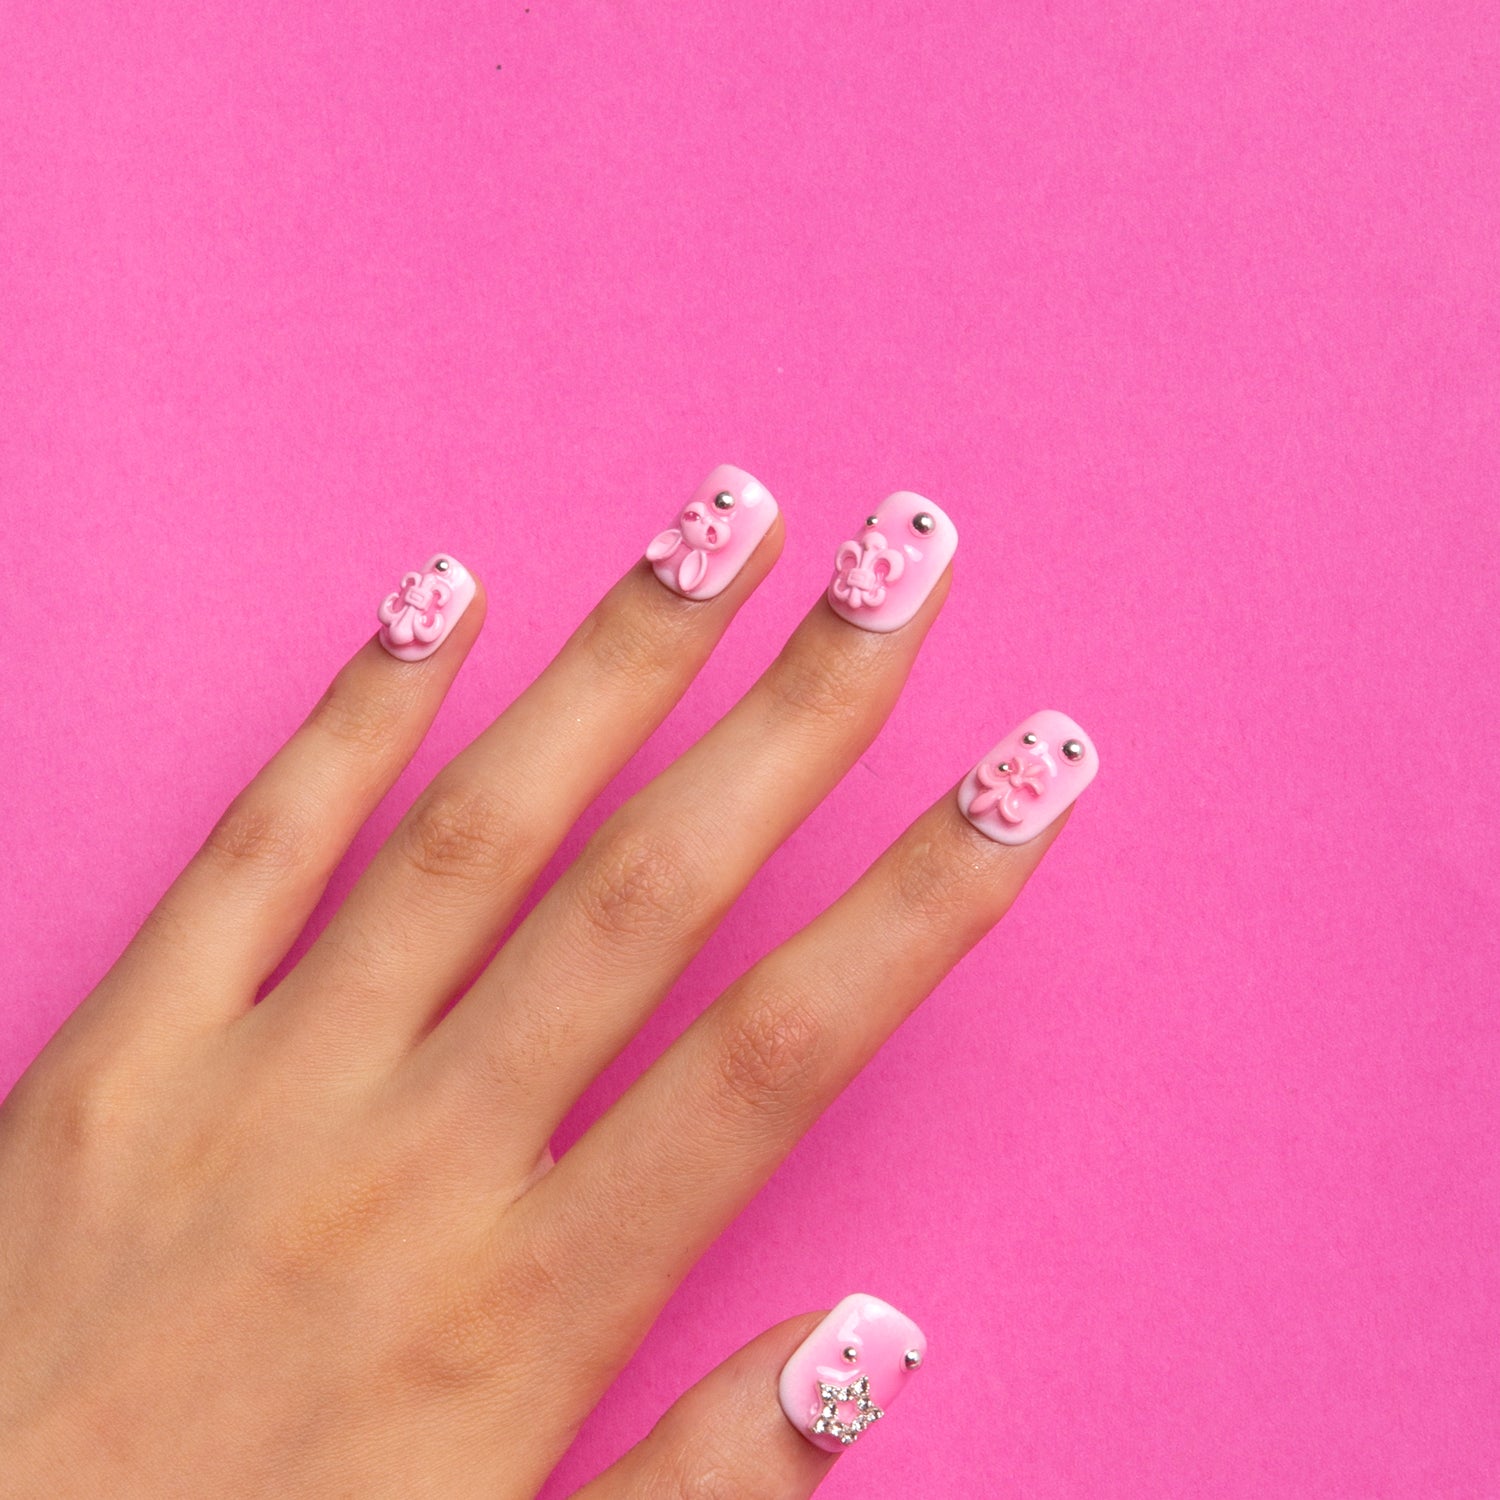 Hand with Pink Bliss Blush square press-on nails featuring gradient pink blush effect and adorable decorations like pink crosses, whimsical cat designs, heart shapes, and planet motifs.